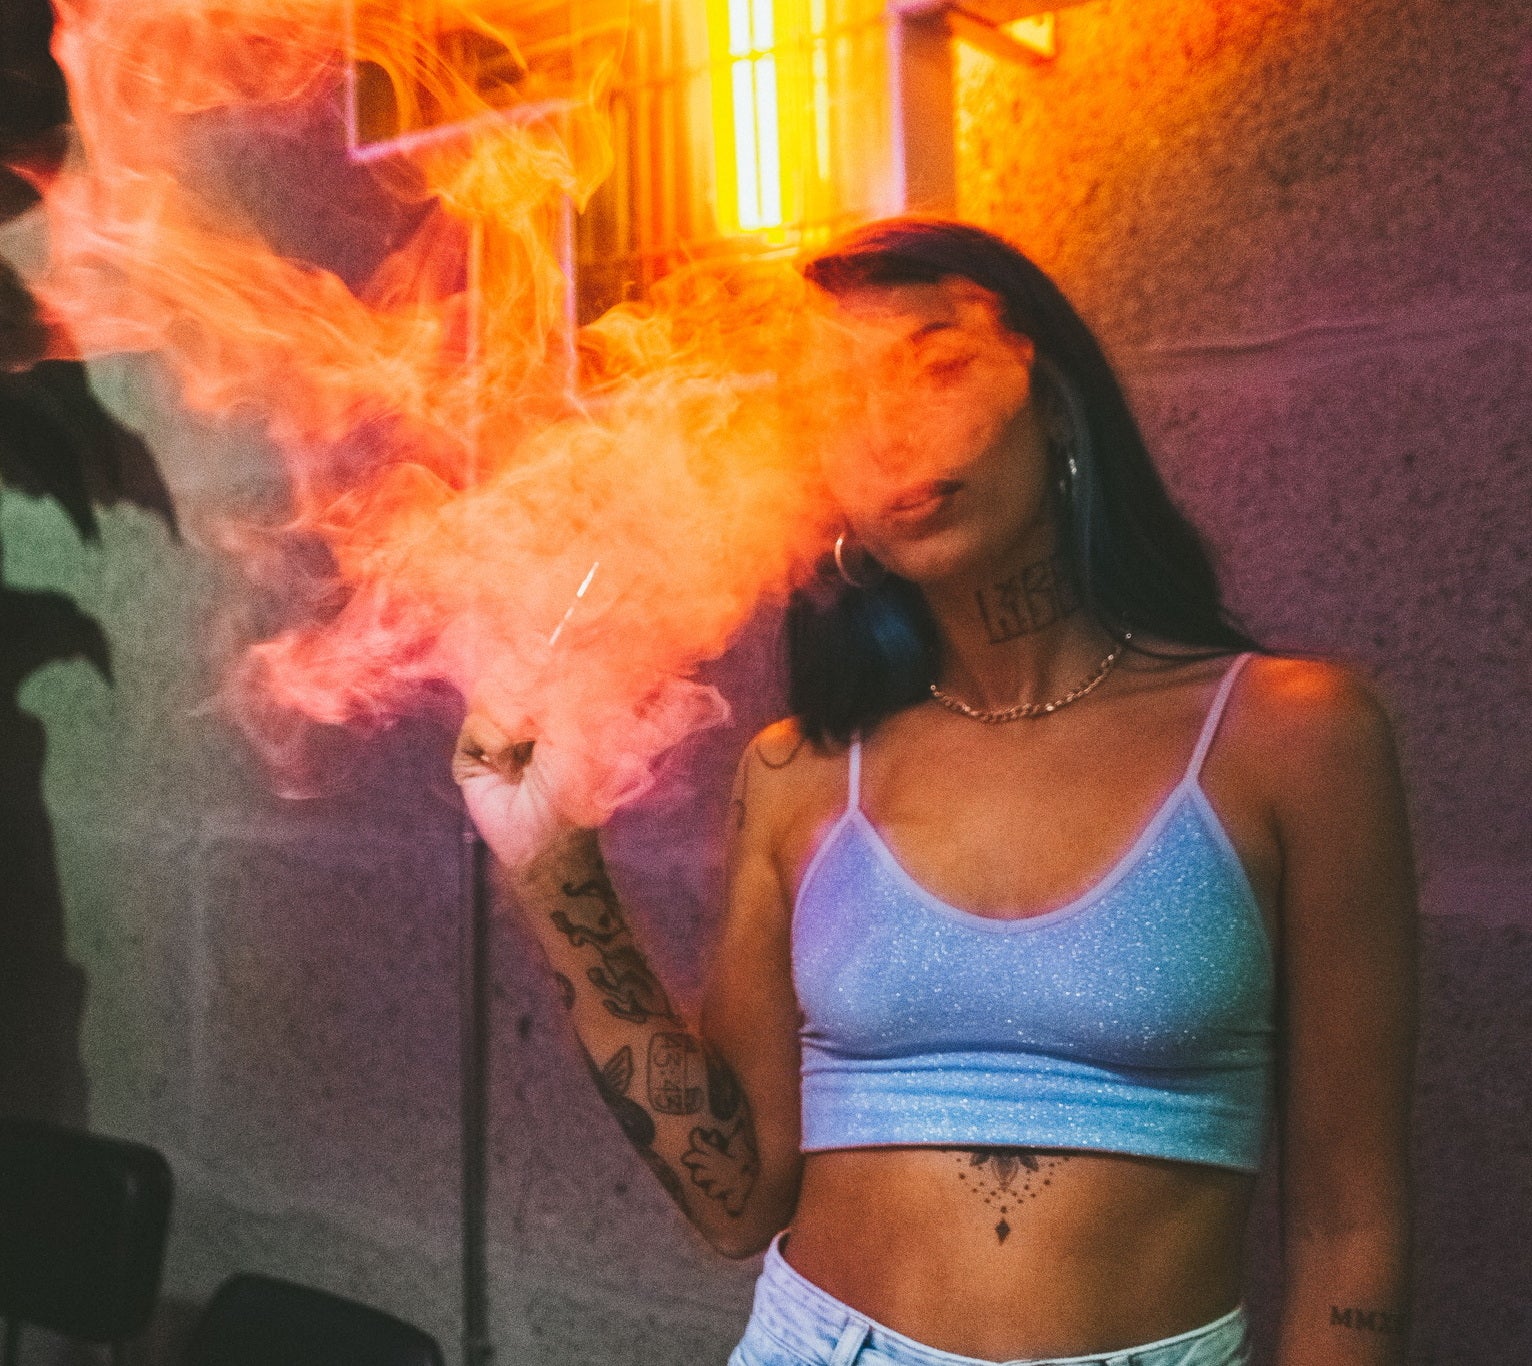 woman smoking weed joint in a cannabis club in front of orange sign